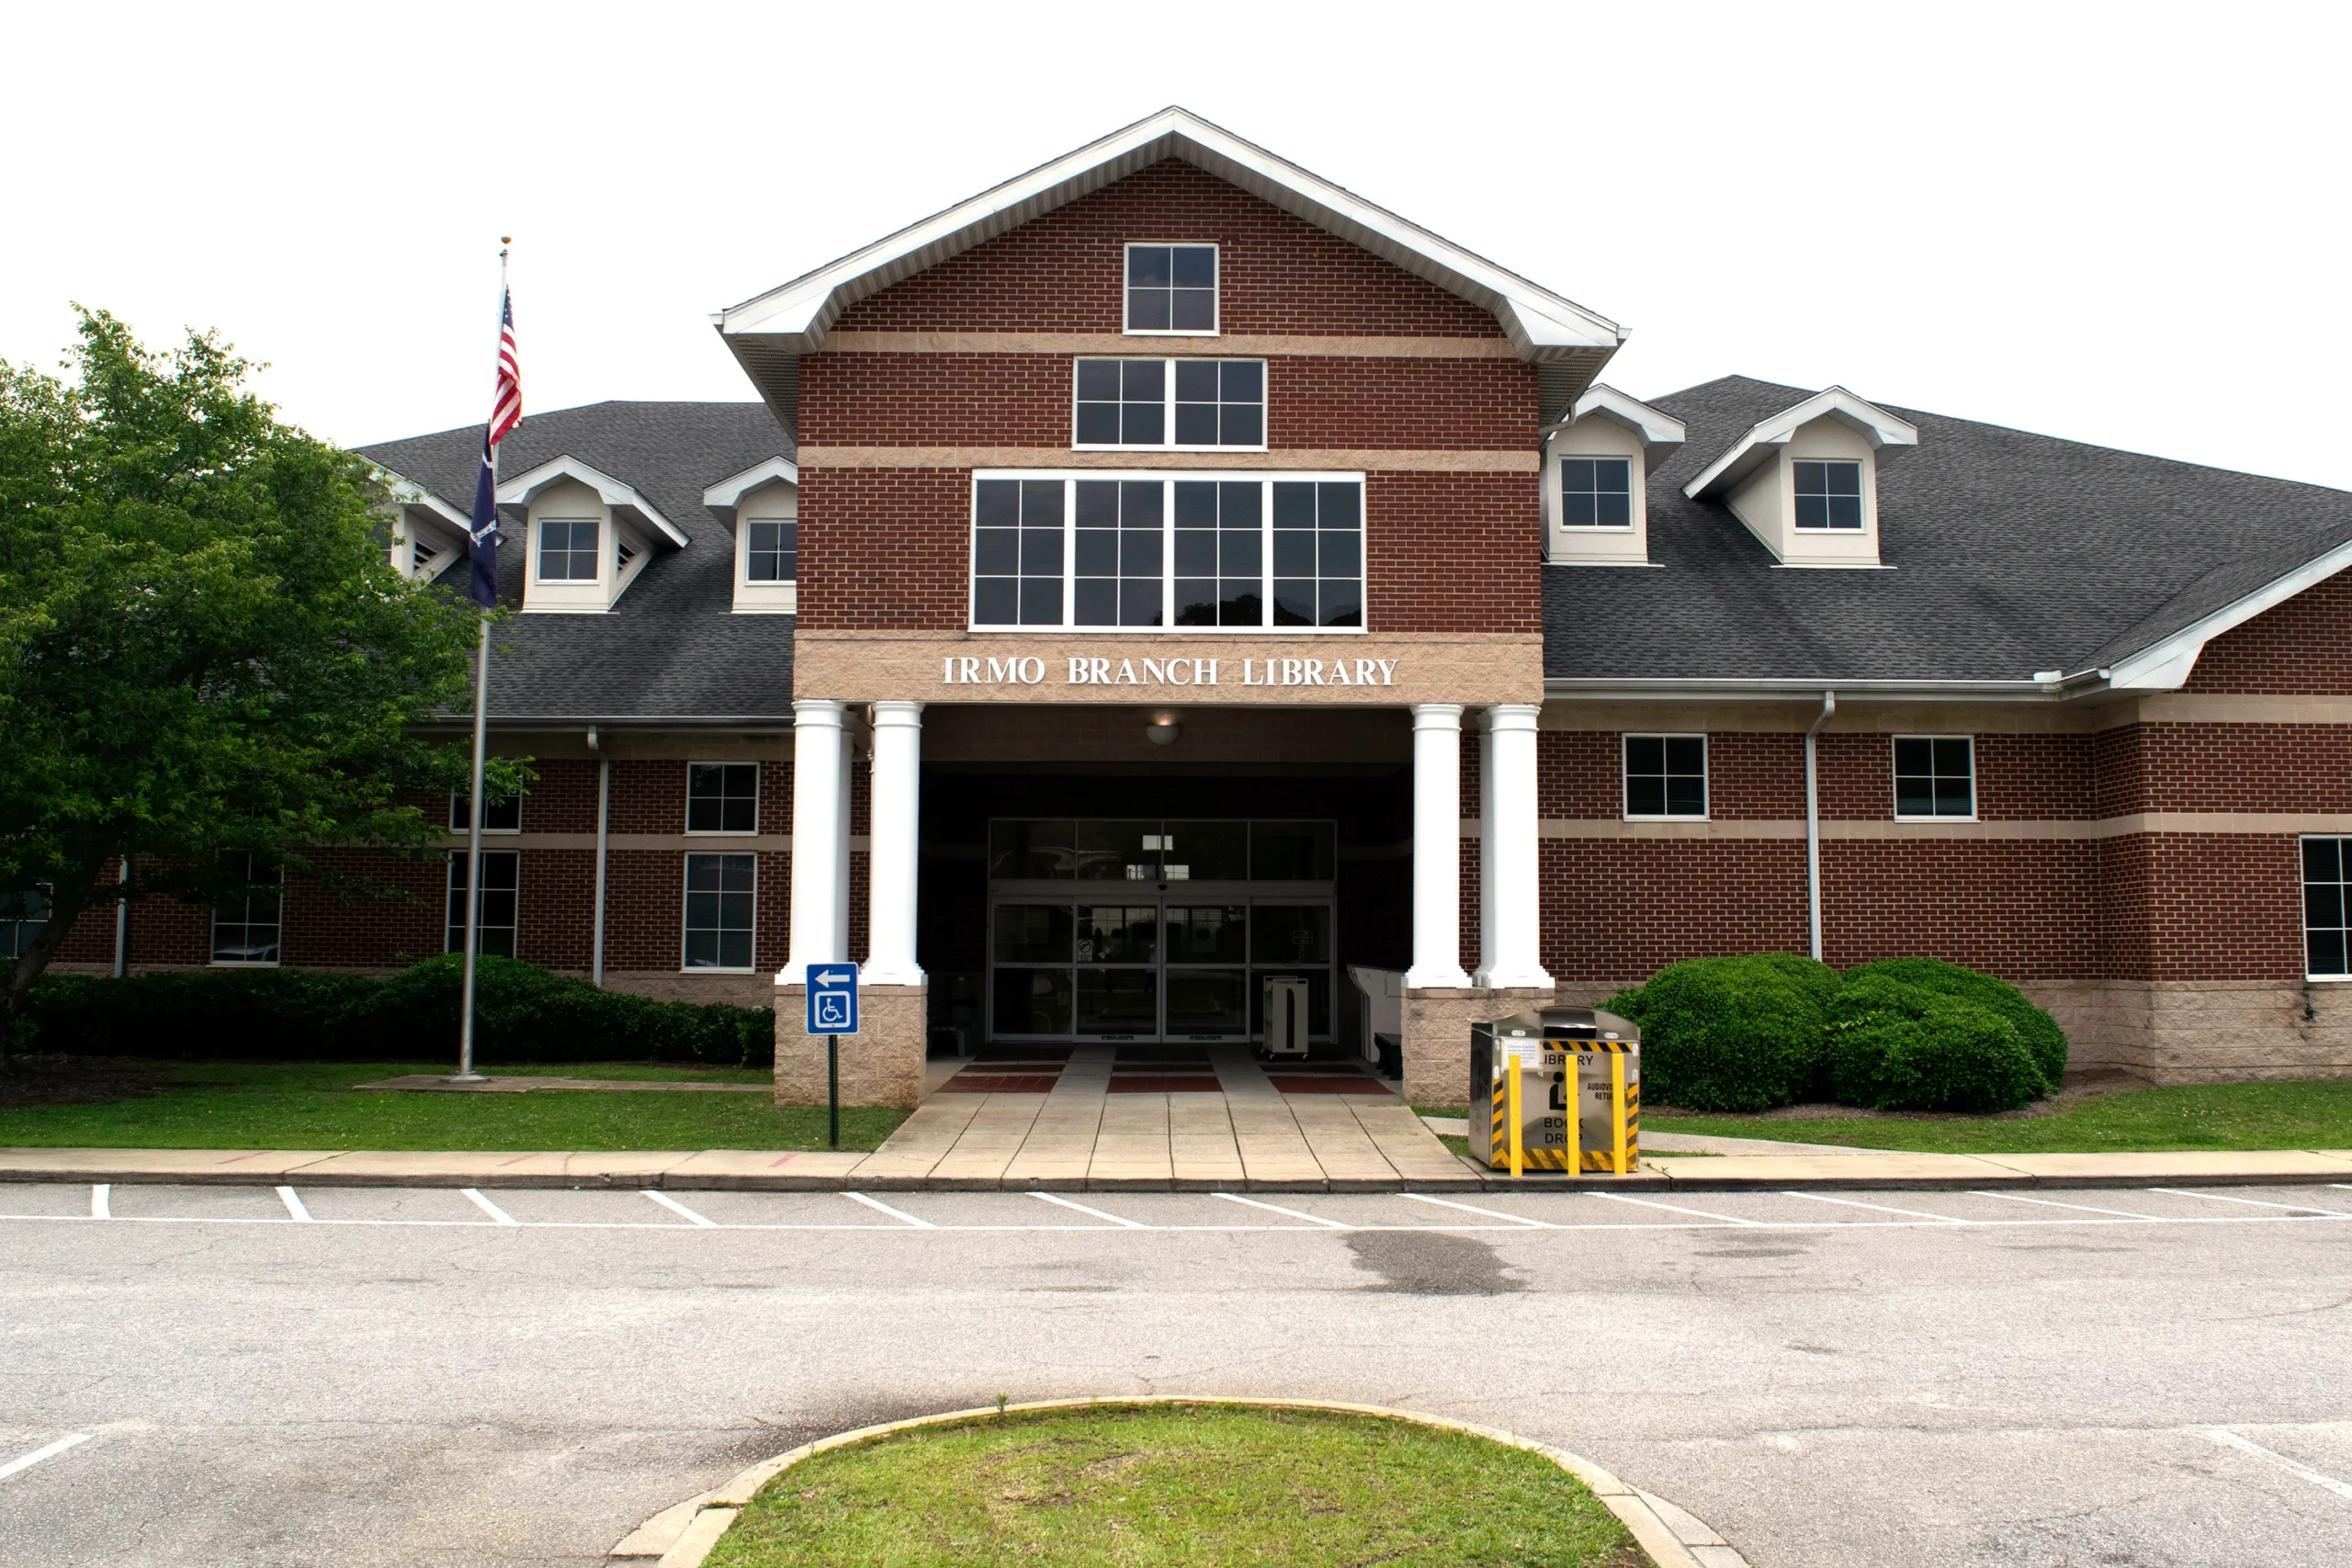 Irmo Branch Library: outside of building